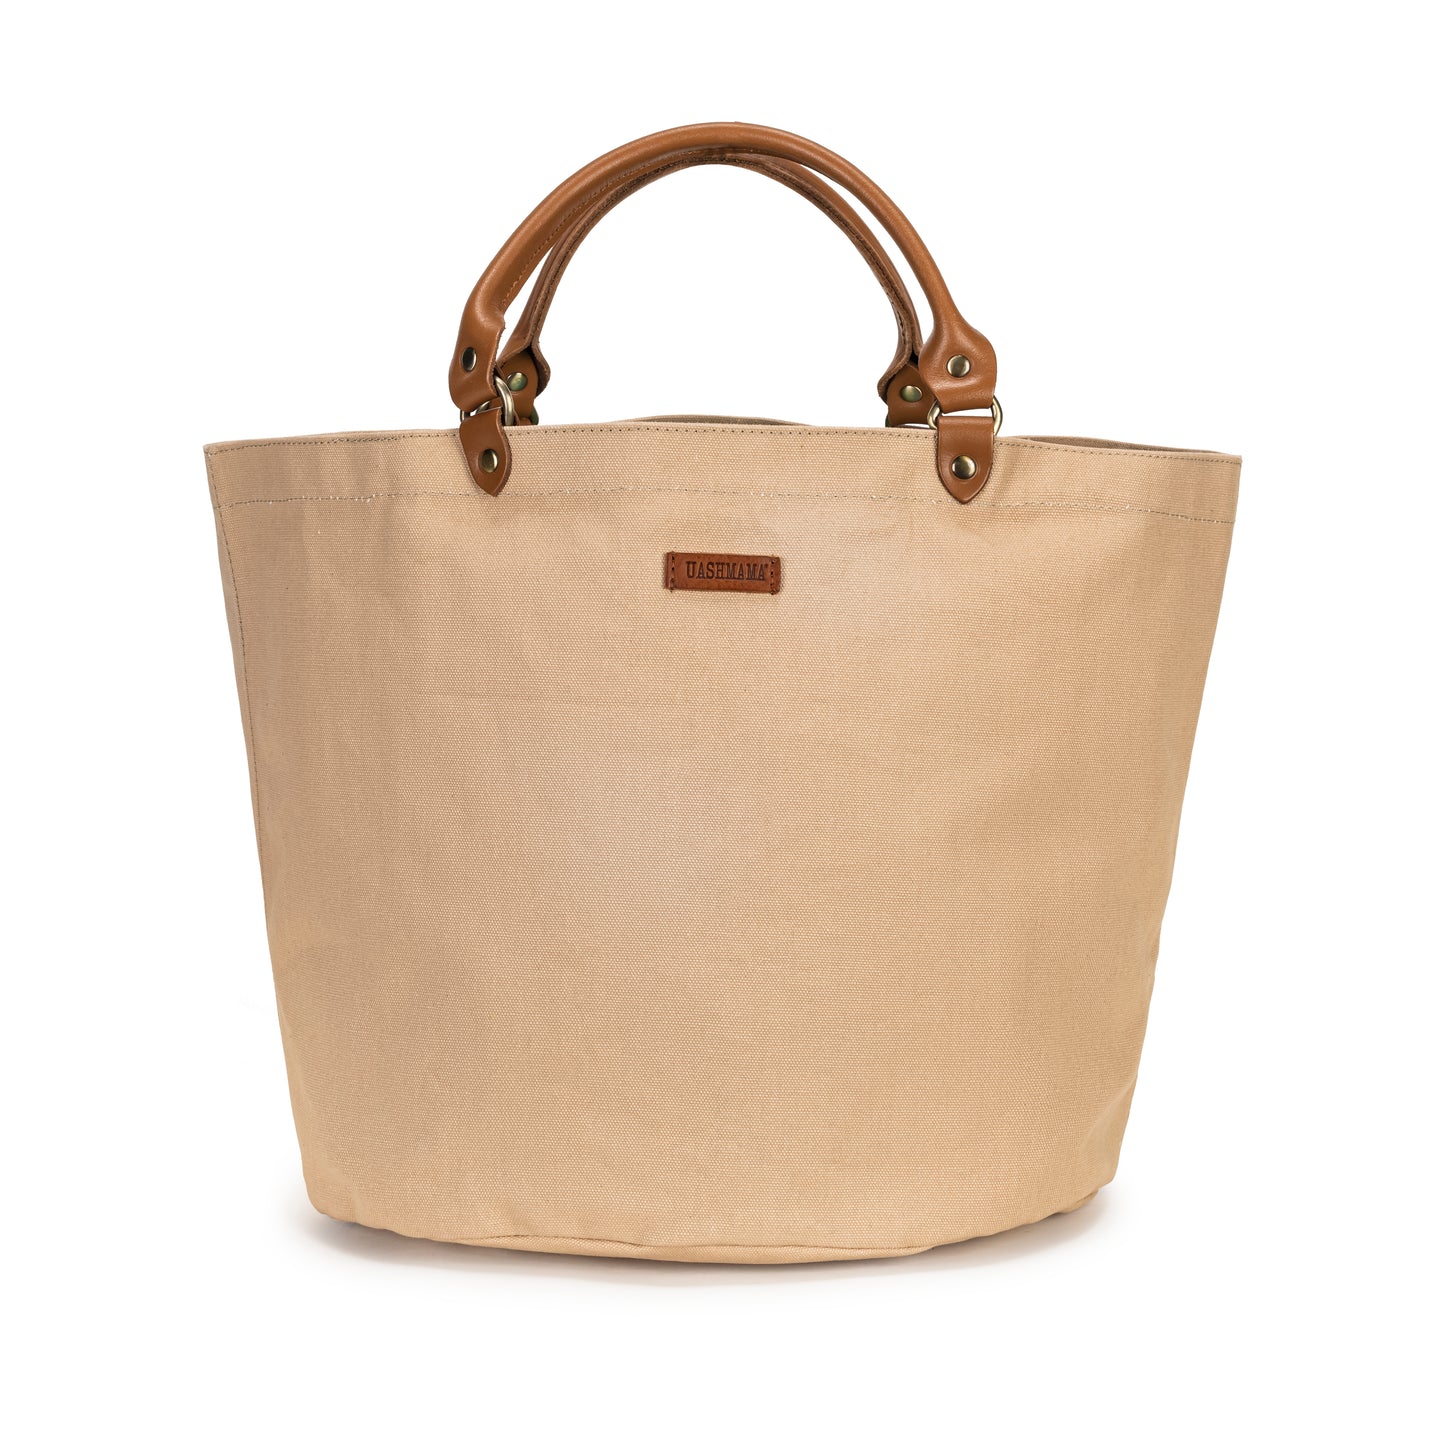 A round shaped tan cotton tote bag with short leather handles and a small leather logo badge